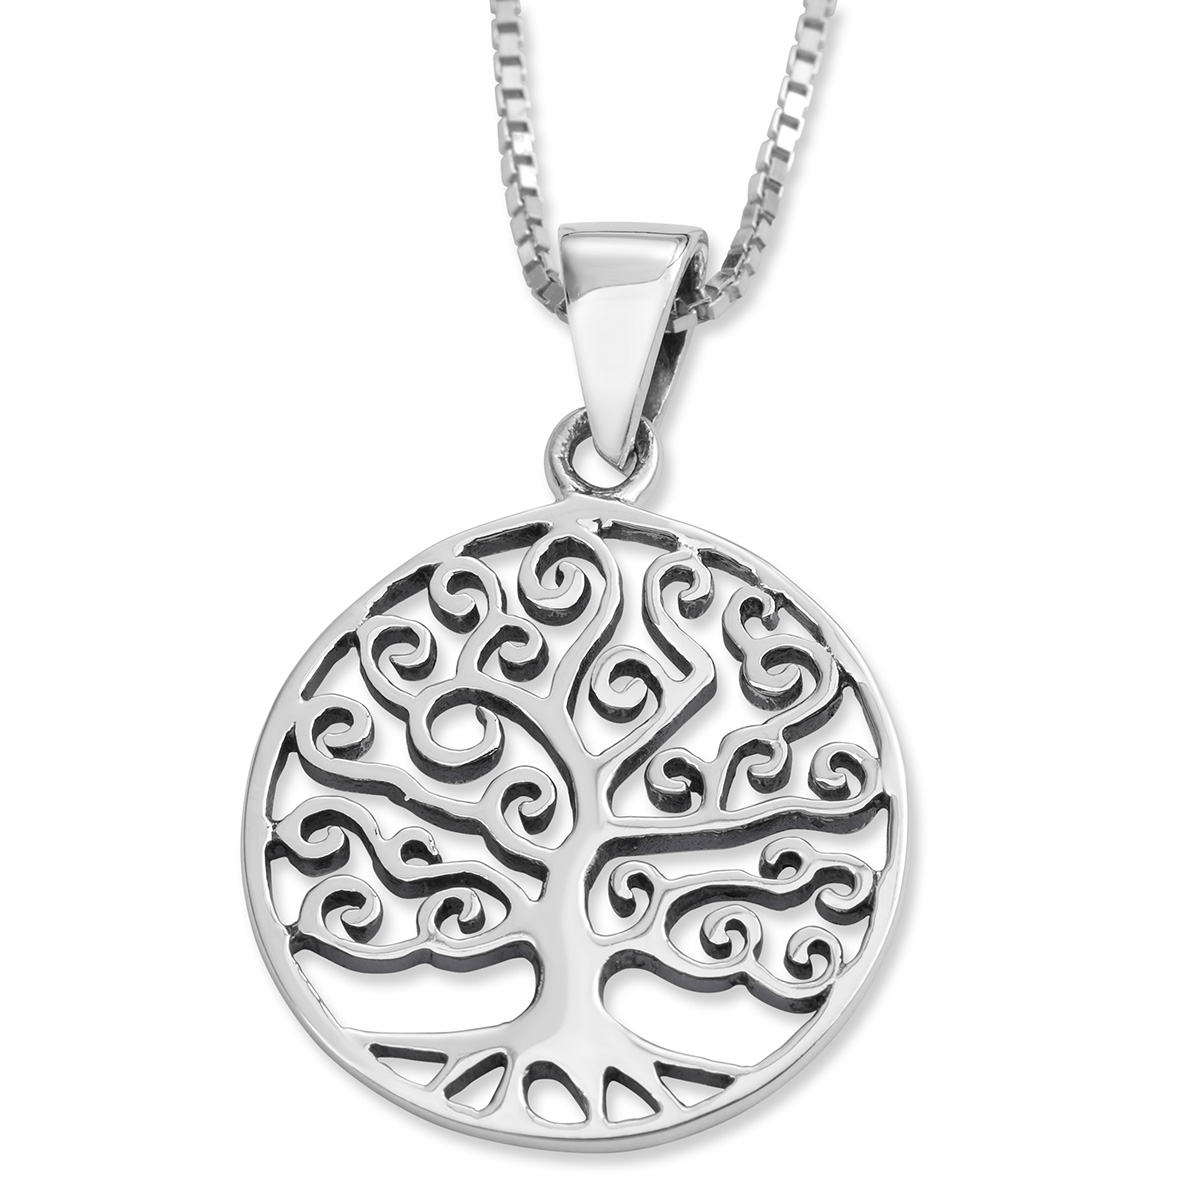 Sterling Silver Women's Pendant Necklace With Ornate Tree of Life Design - 1